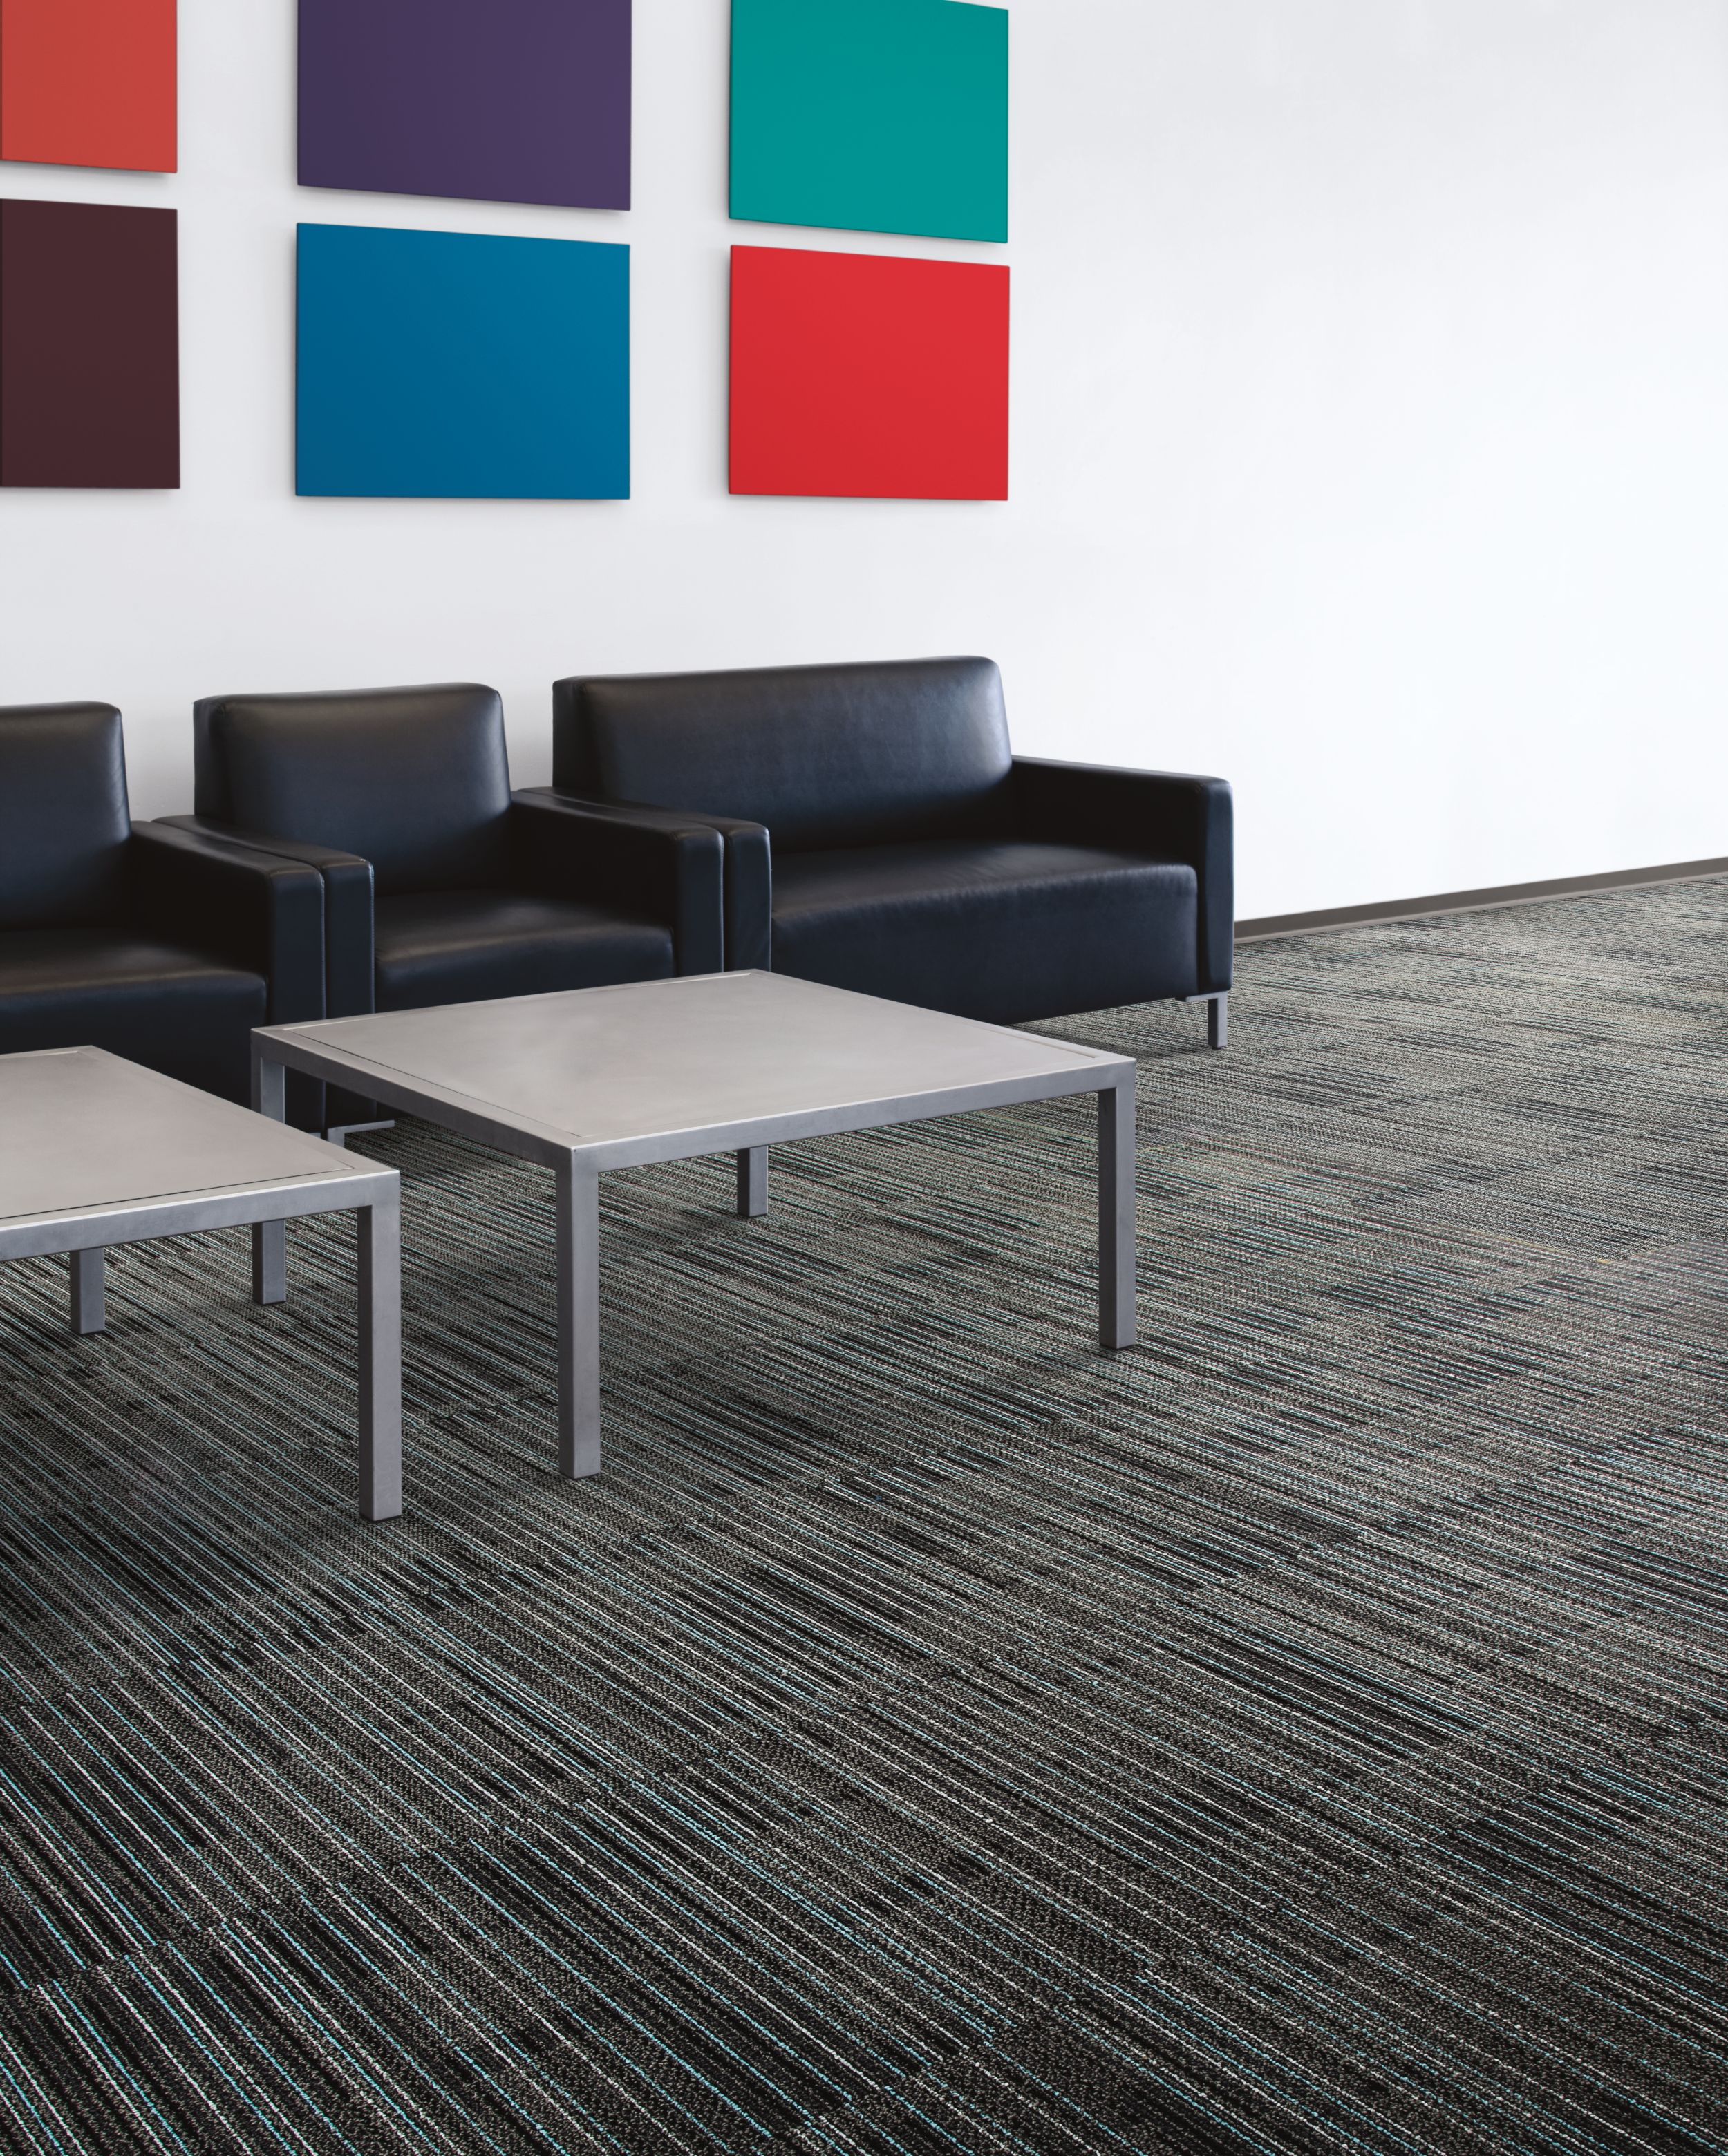 Interface Gather carpet tile in seating area with black chairs and colorful artwork imagen número 2